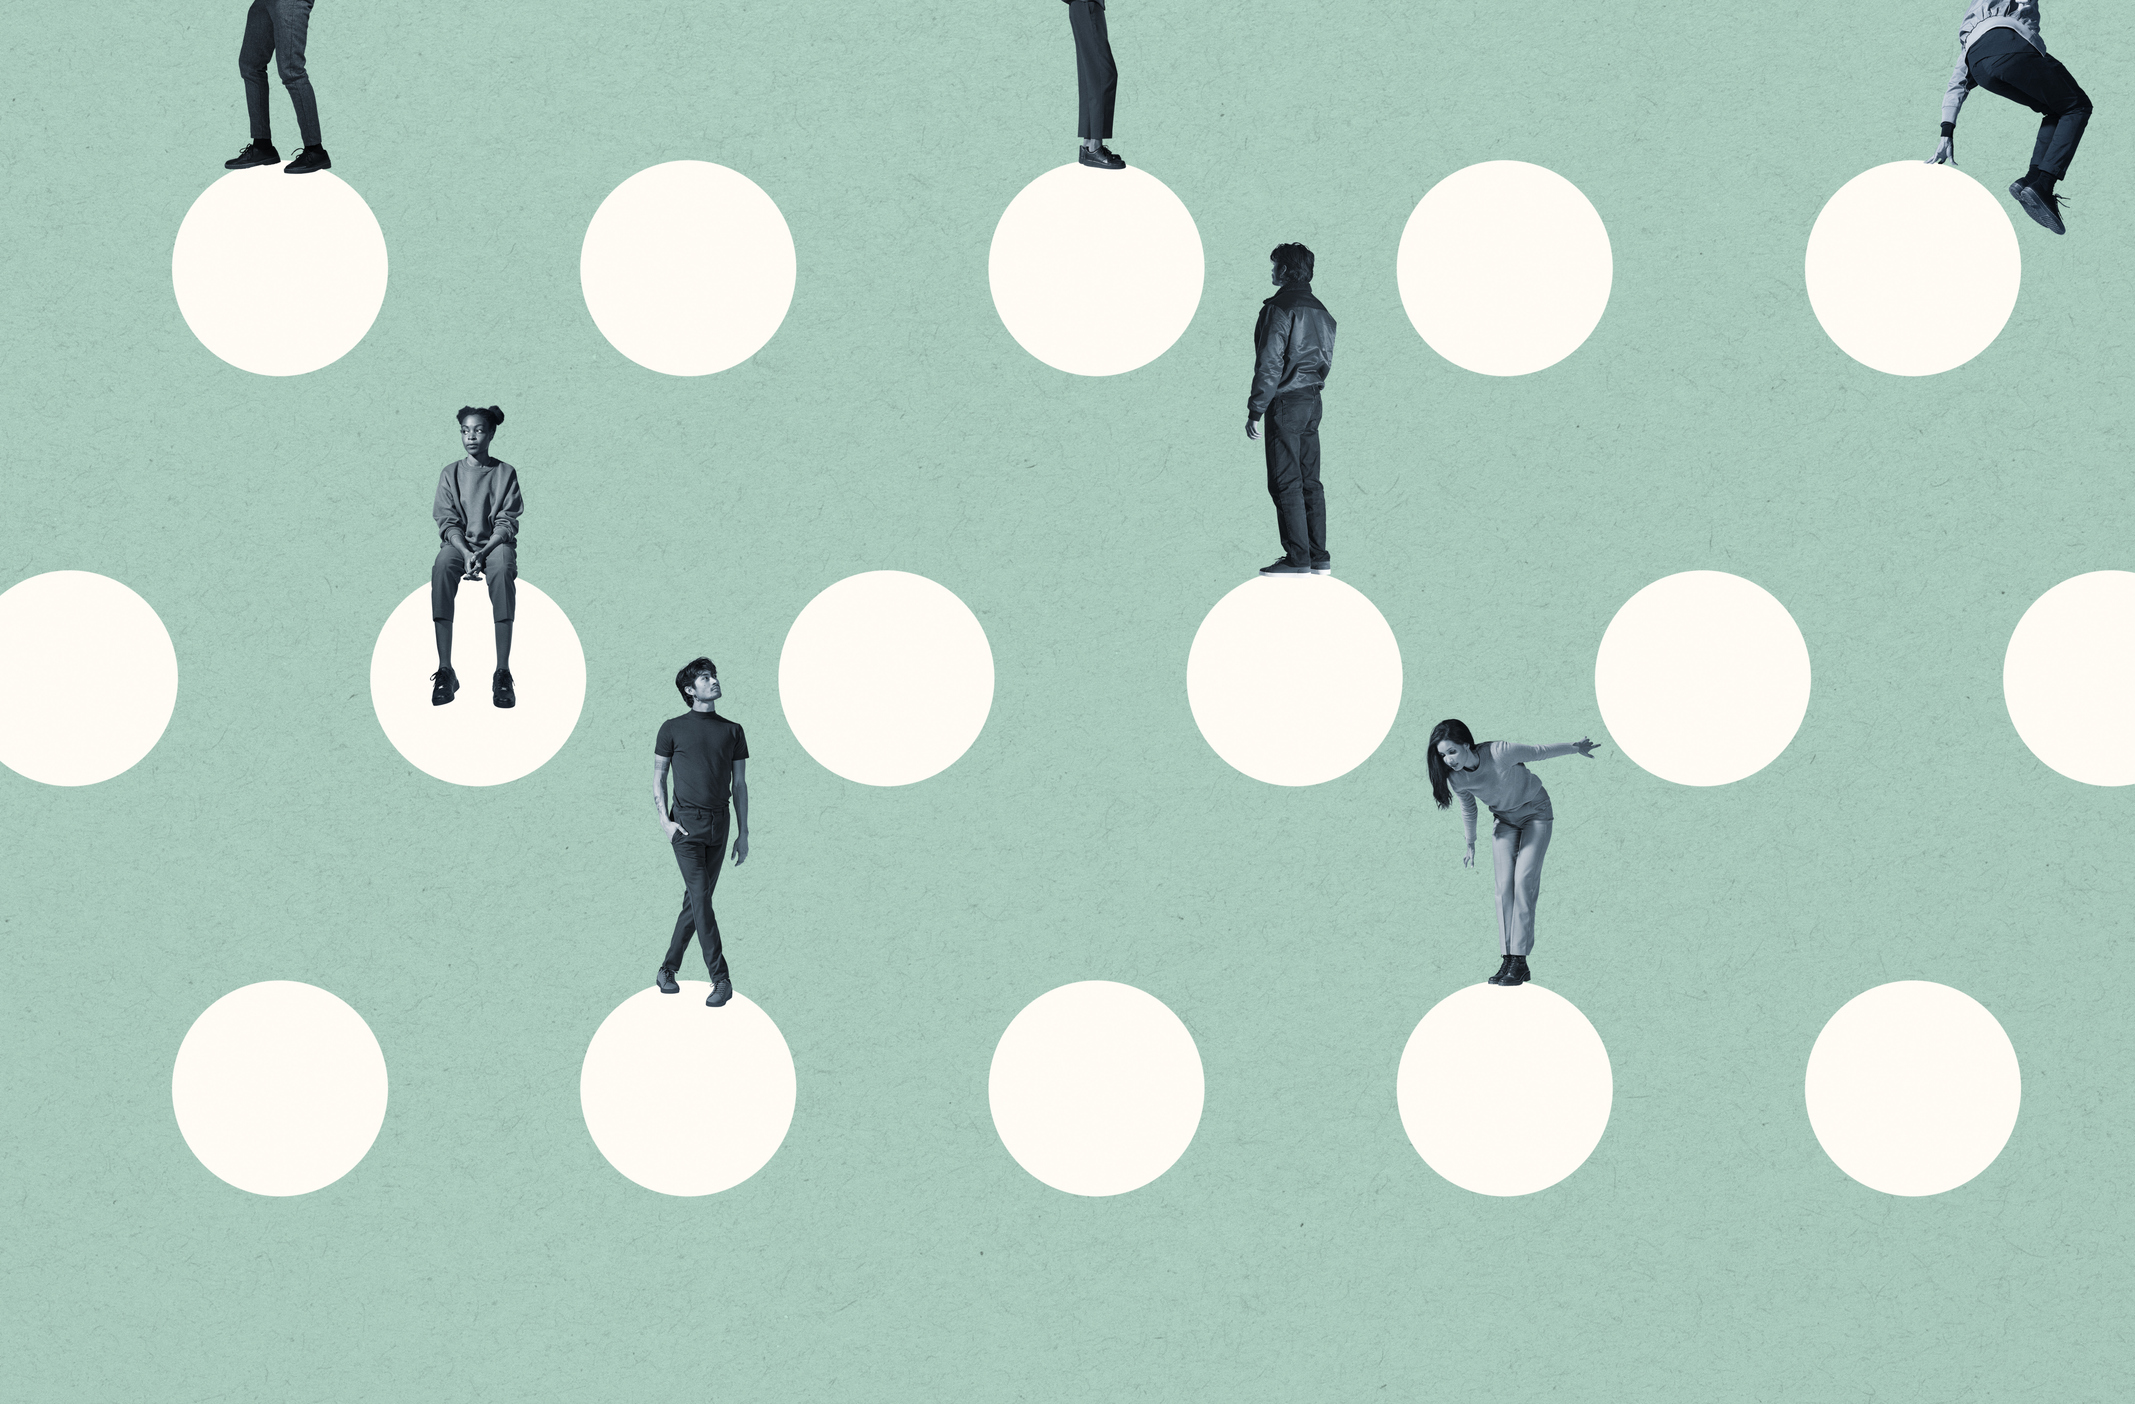 An image of multi-ethnic men and women perched on white circles against a seafoam green background.